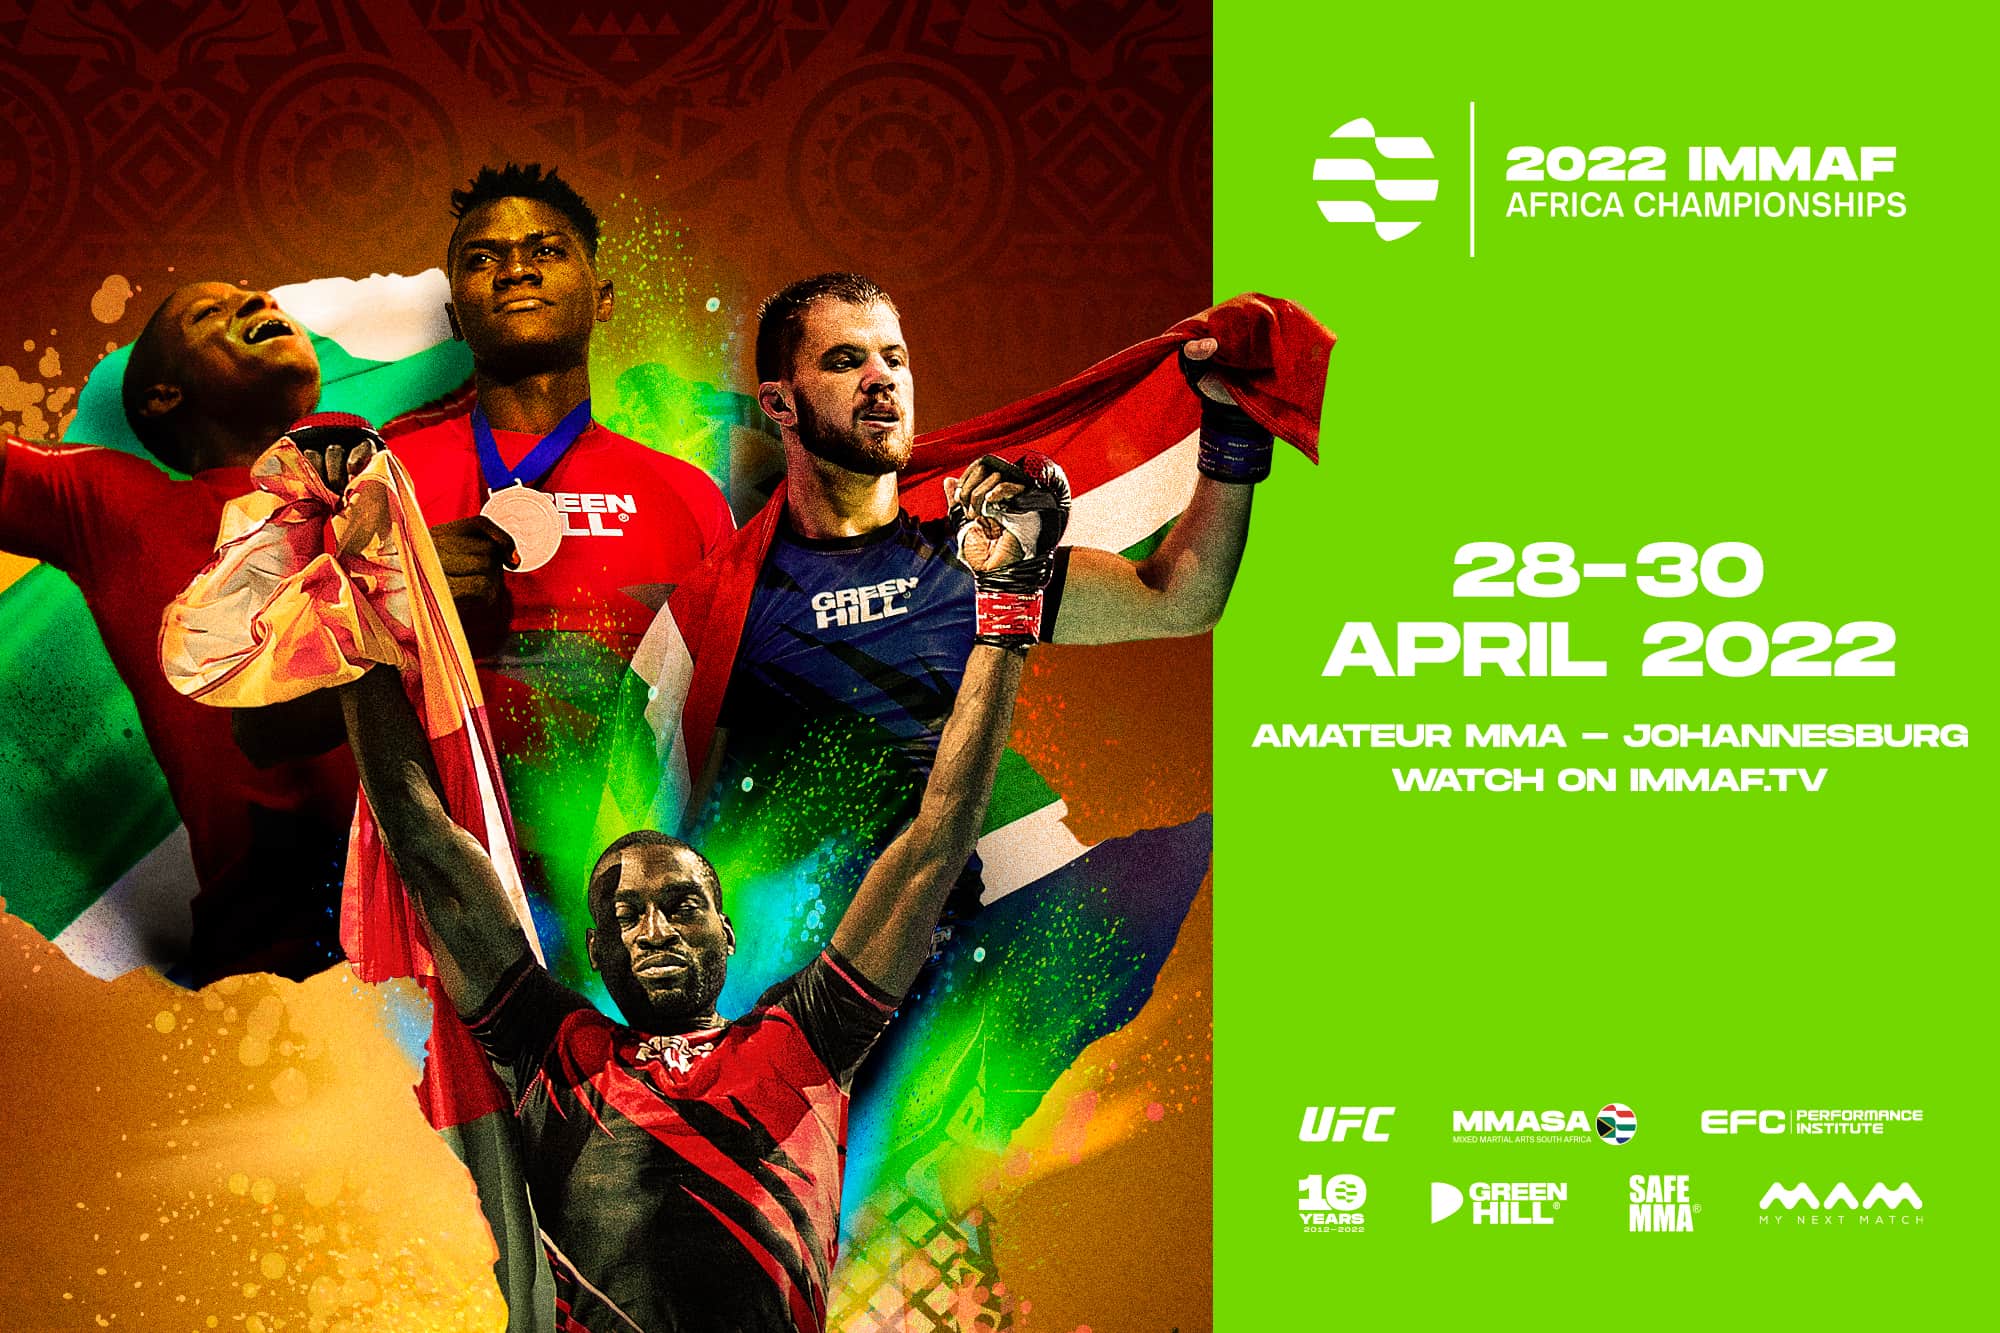 IMMAF Africa Championships return to Johannesburg with WADA seal